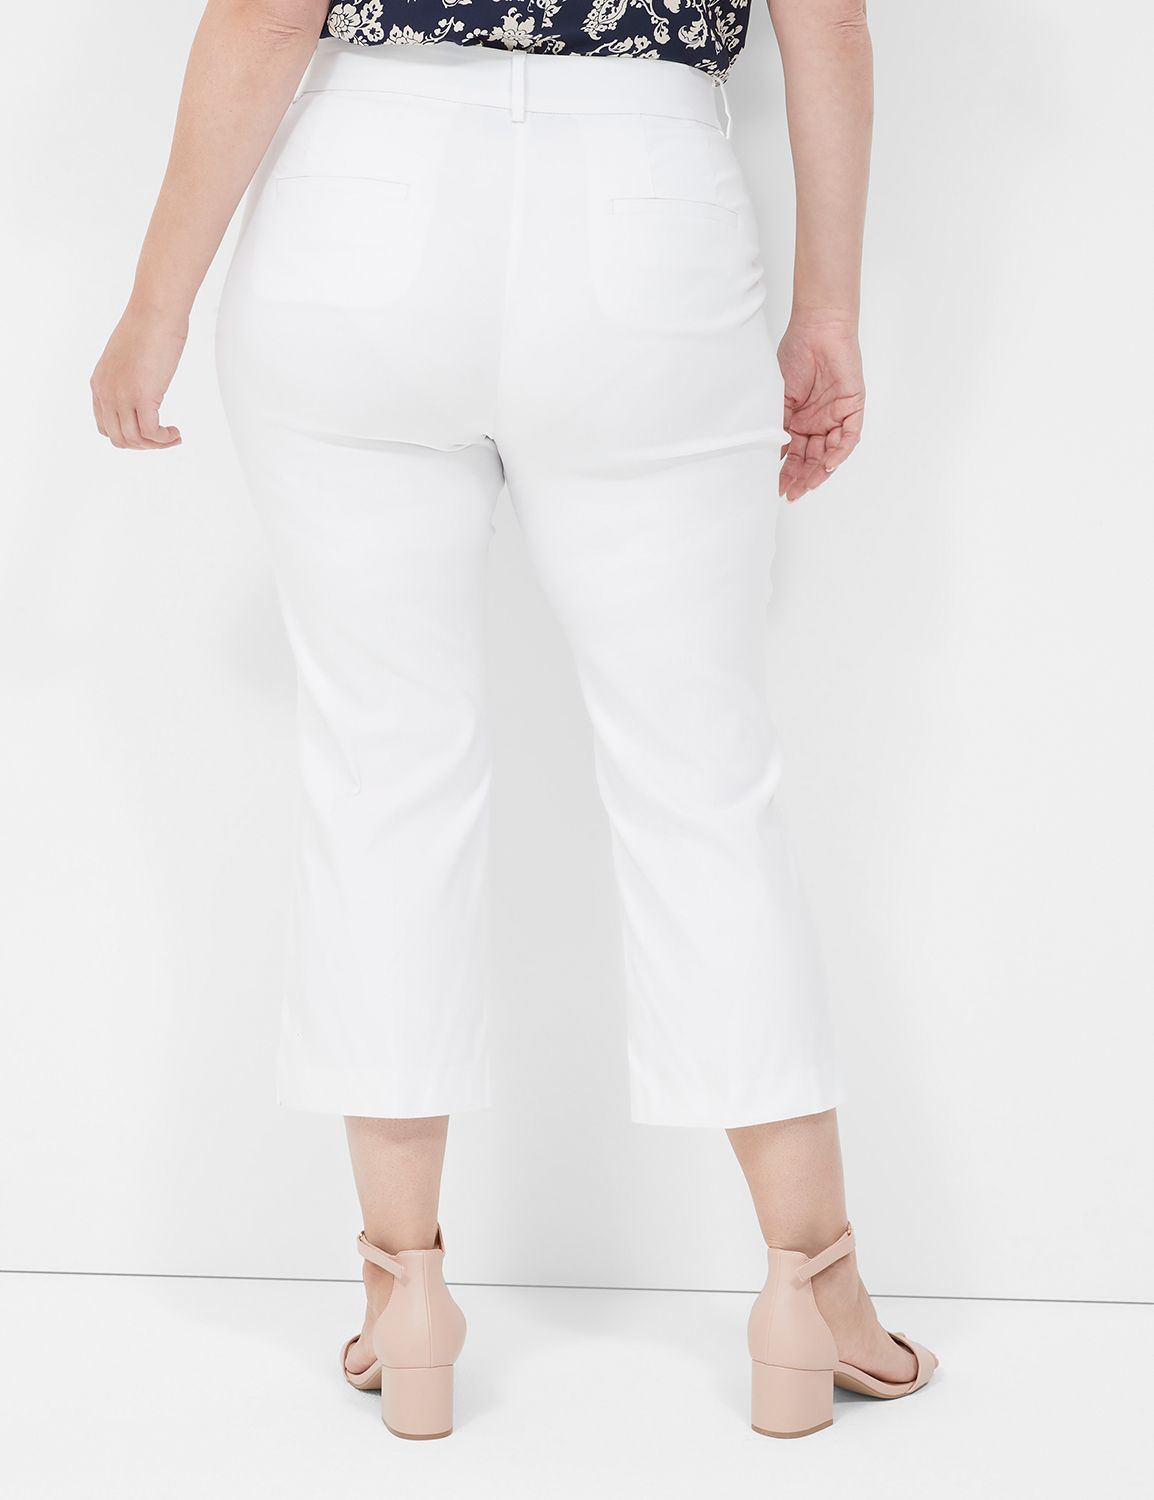 Retro Rose Bliss Plus Size Buttery Soft Capris – BeYOUtifully Comfortable